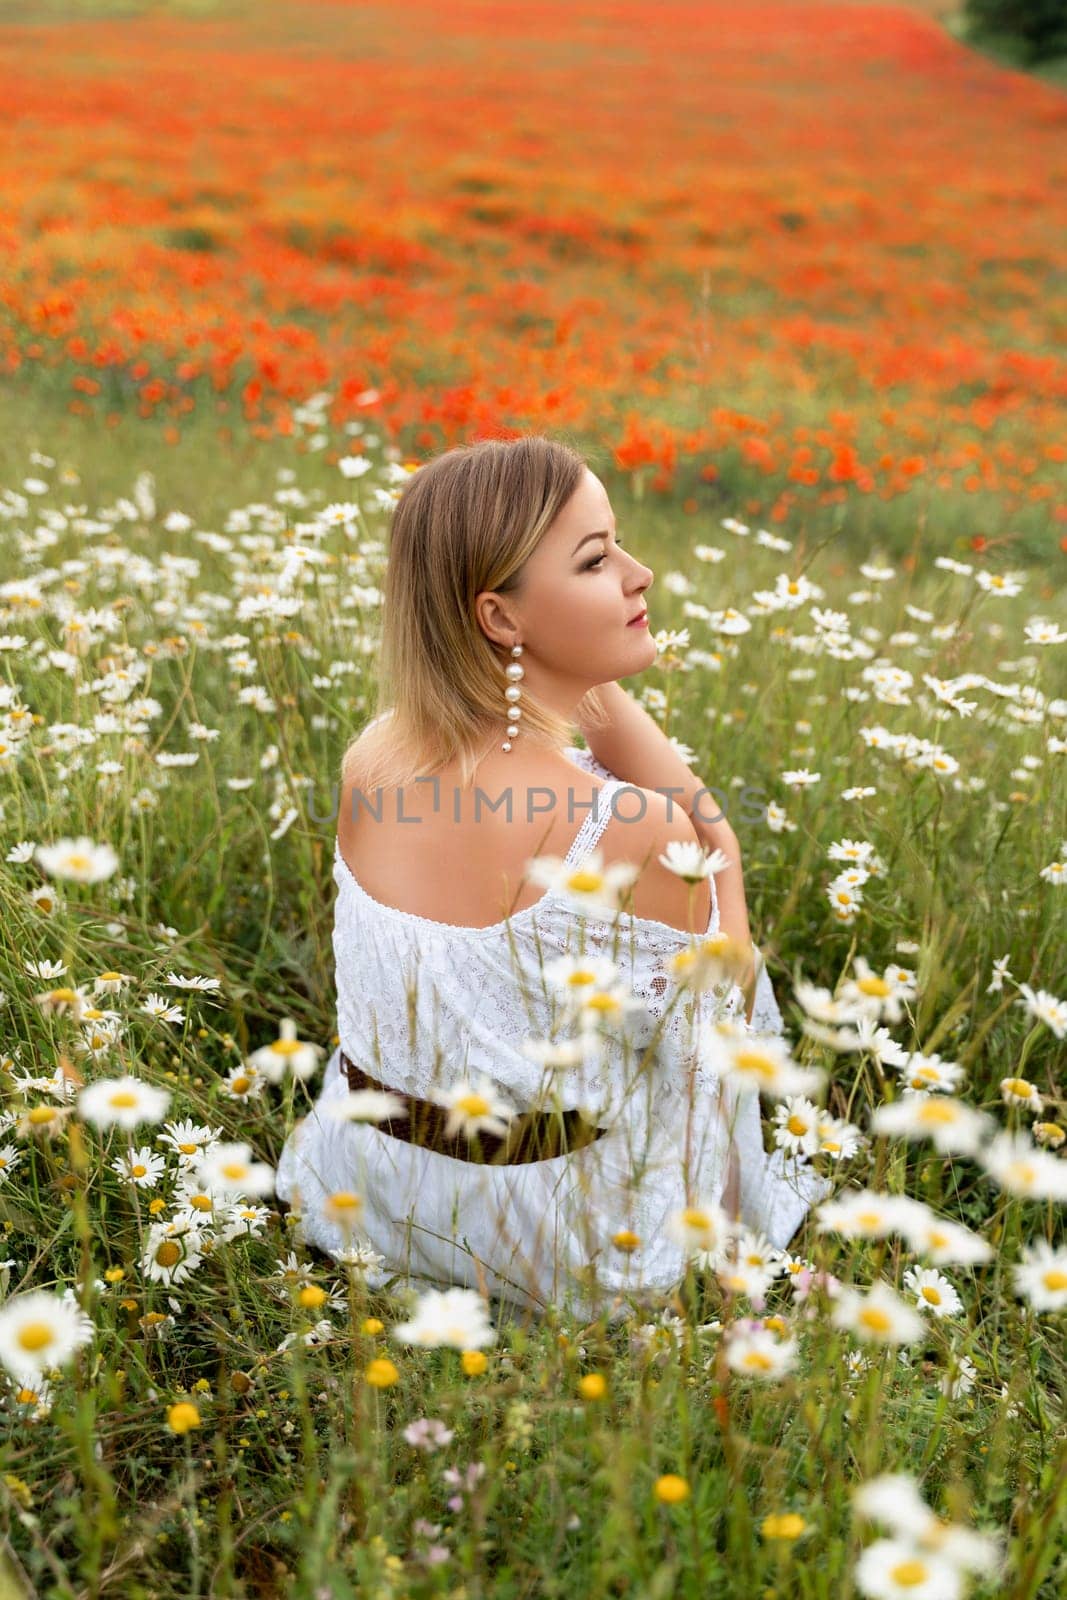 A woman sits in a chamomile field, dressed in a white dress.